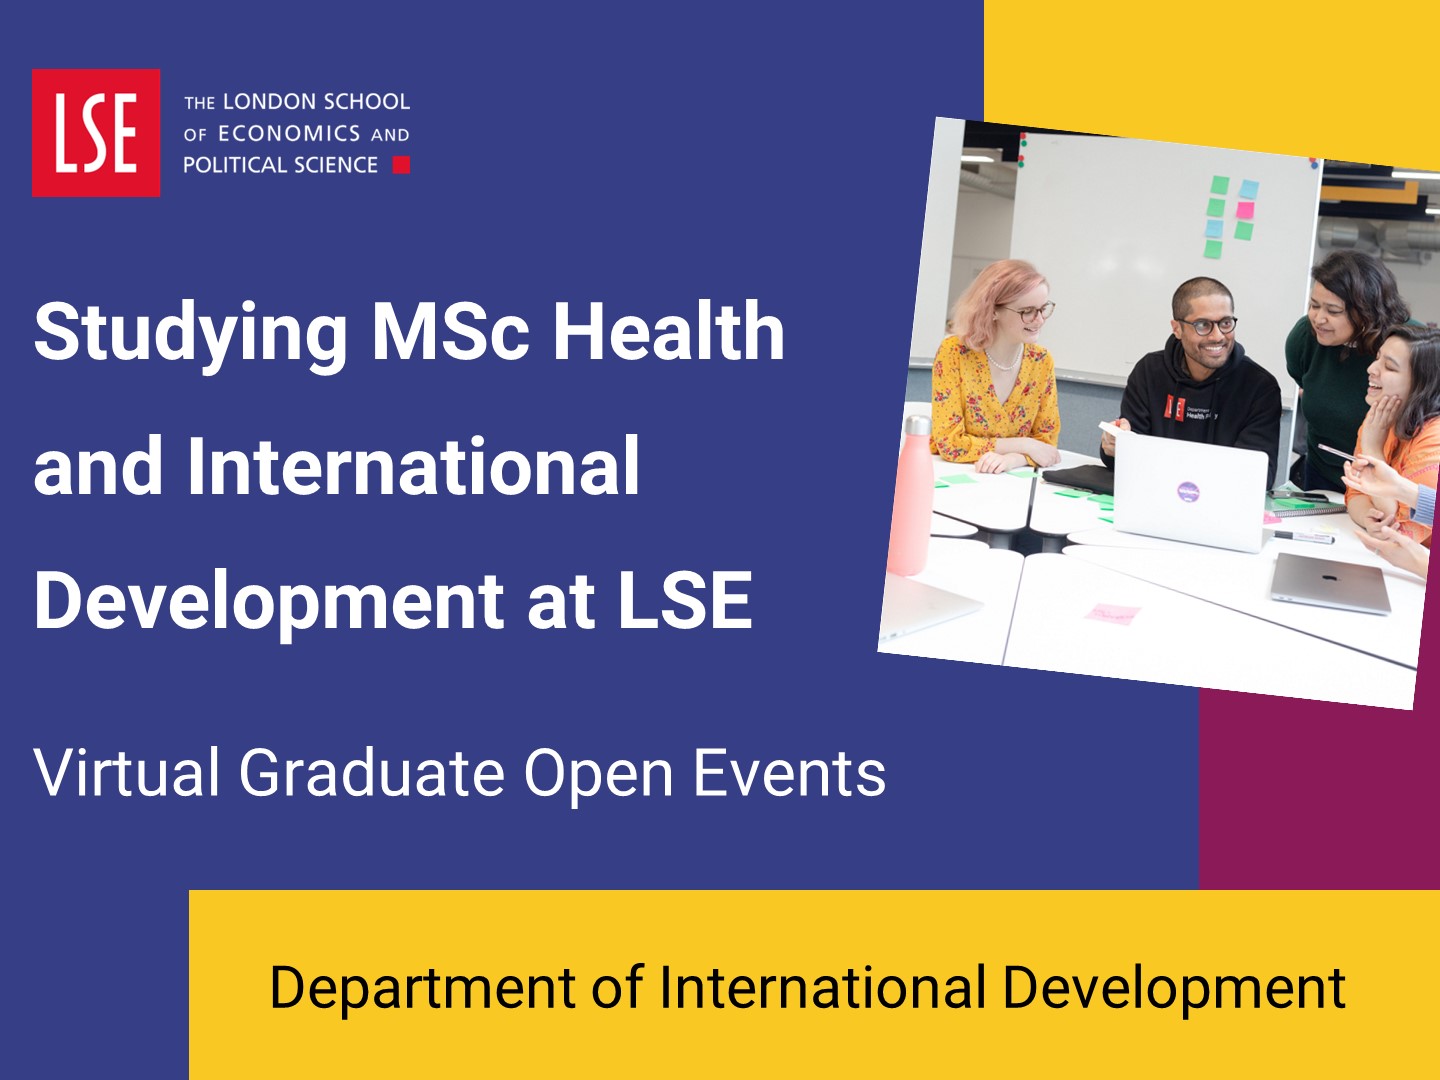 Introduction to studying MSc Health and International Development at LSE